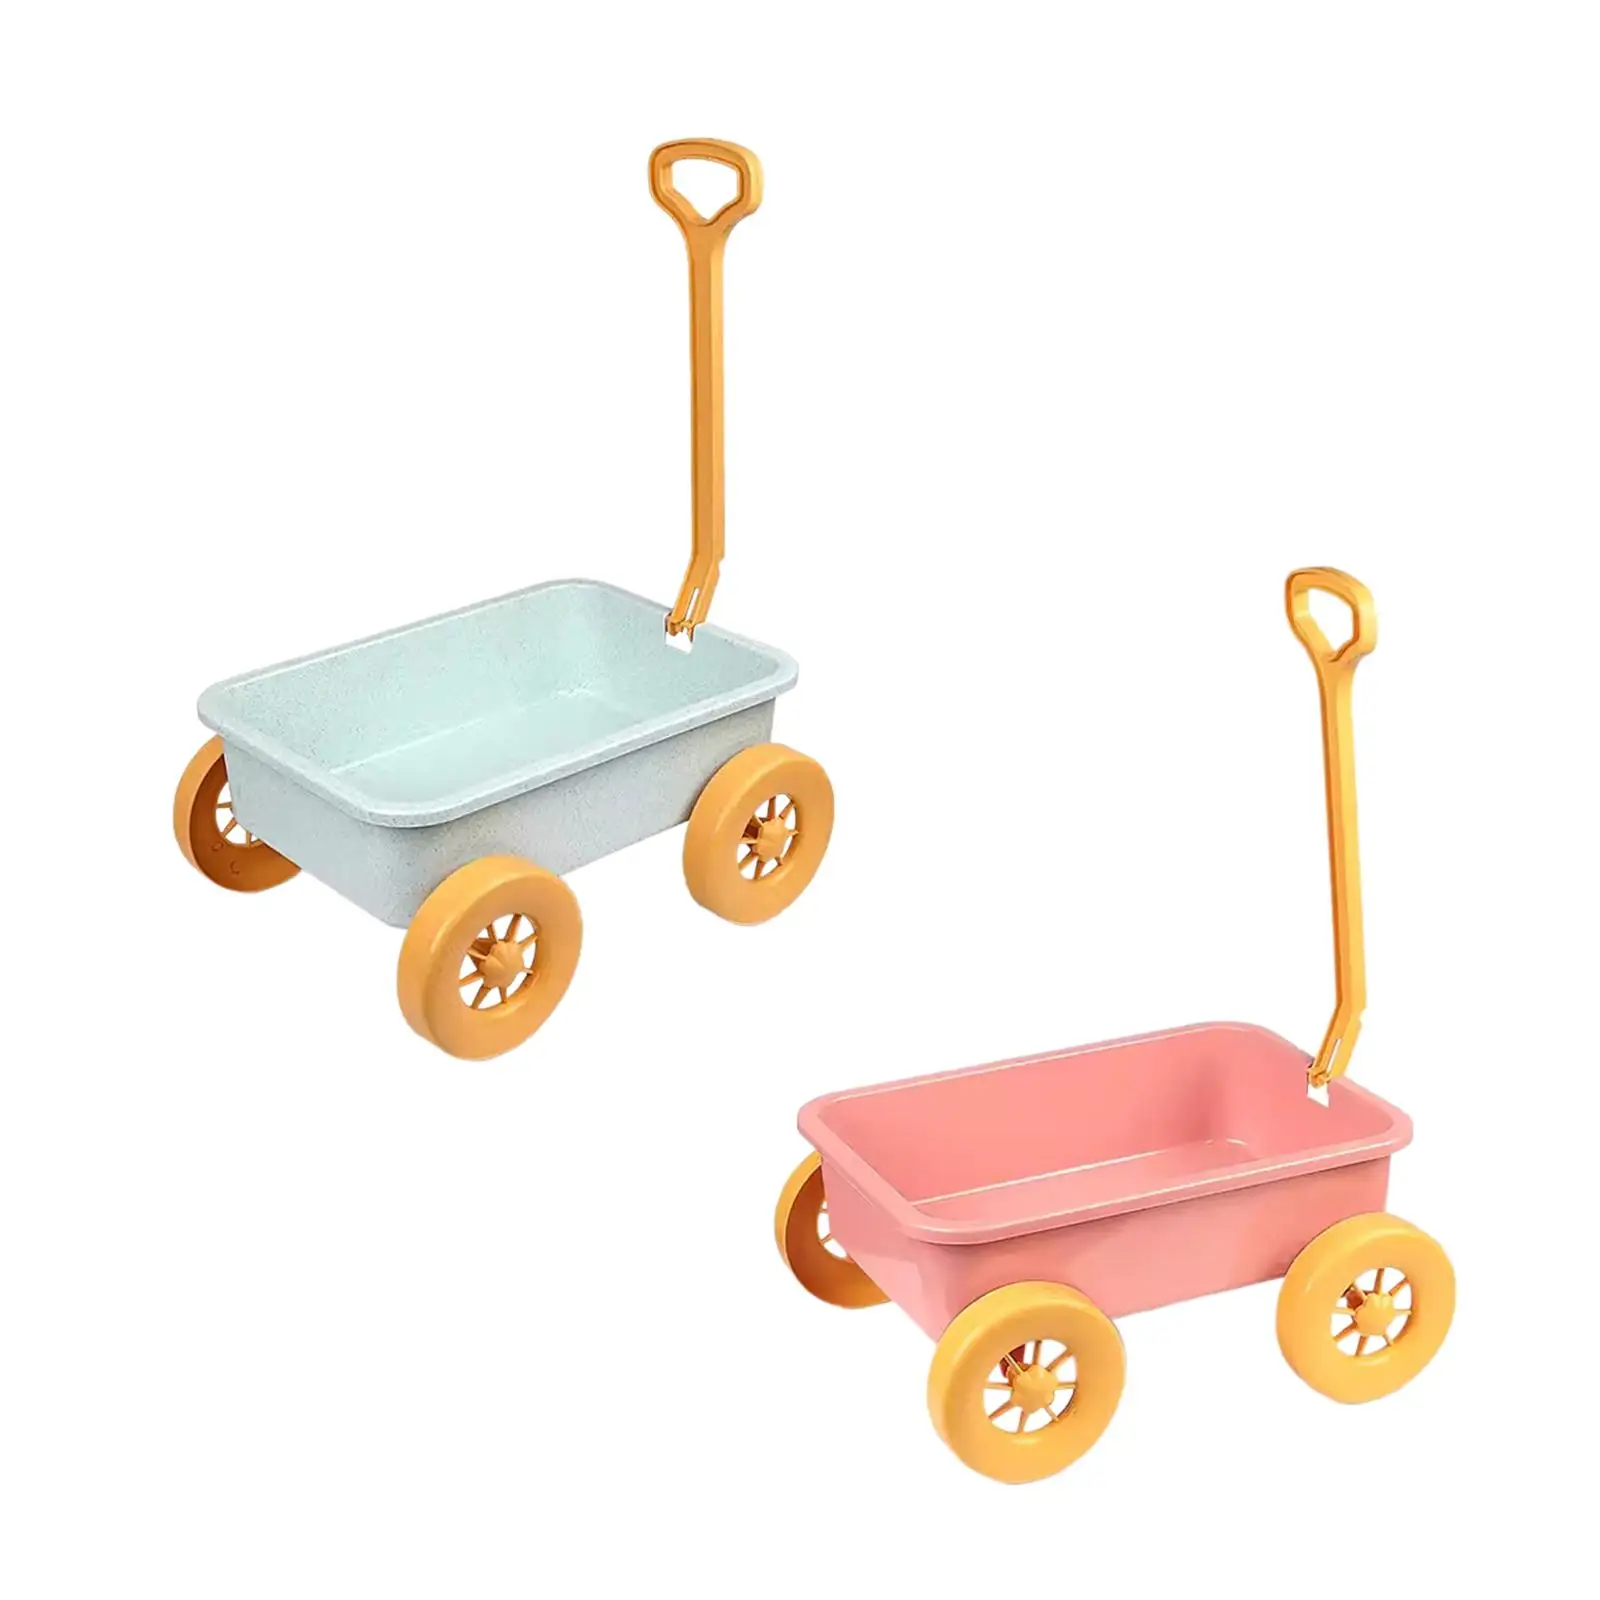 

Pretend Play Wagon Toy Kid Outdoor Toy Beach Game Toy Portable Summer Sand Toy Trolley for Outdoor Gardening Indoor Beach Yard